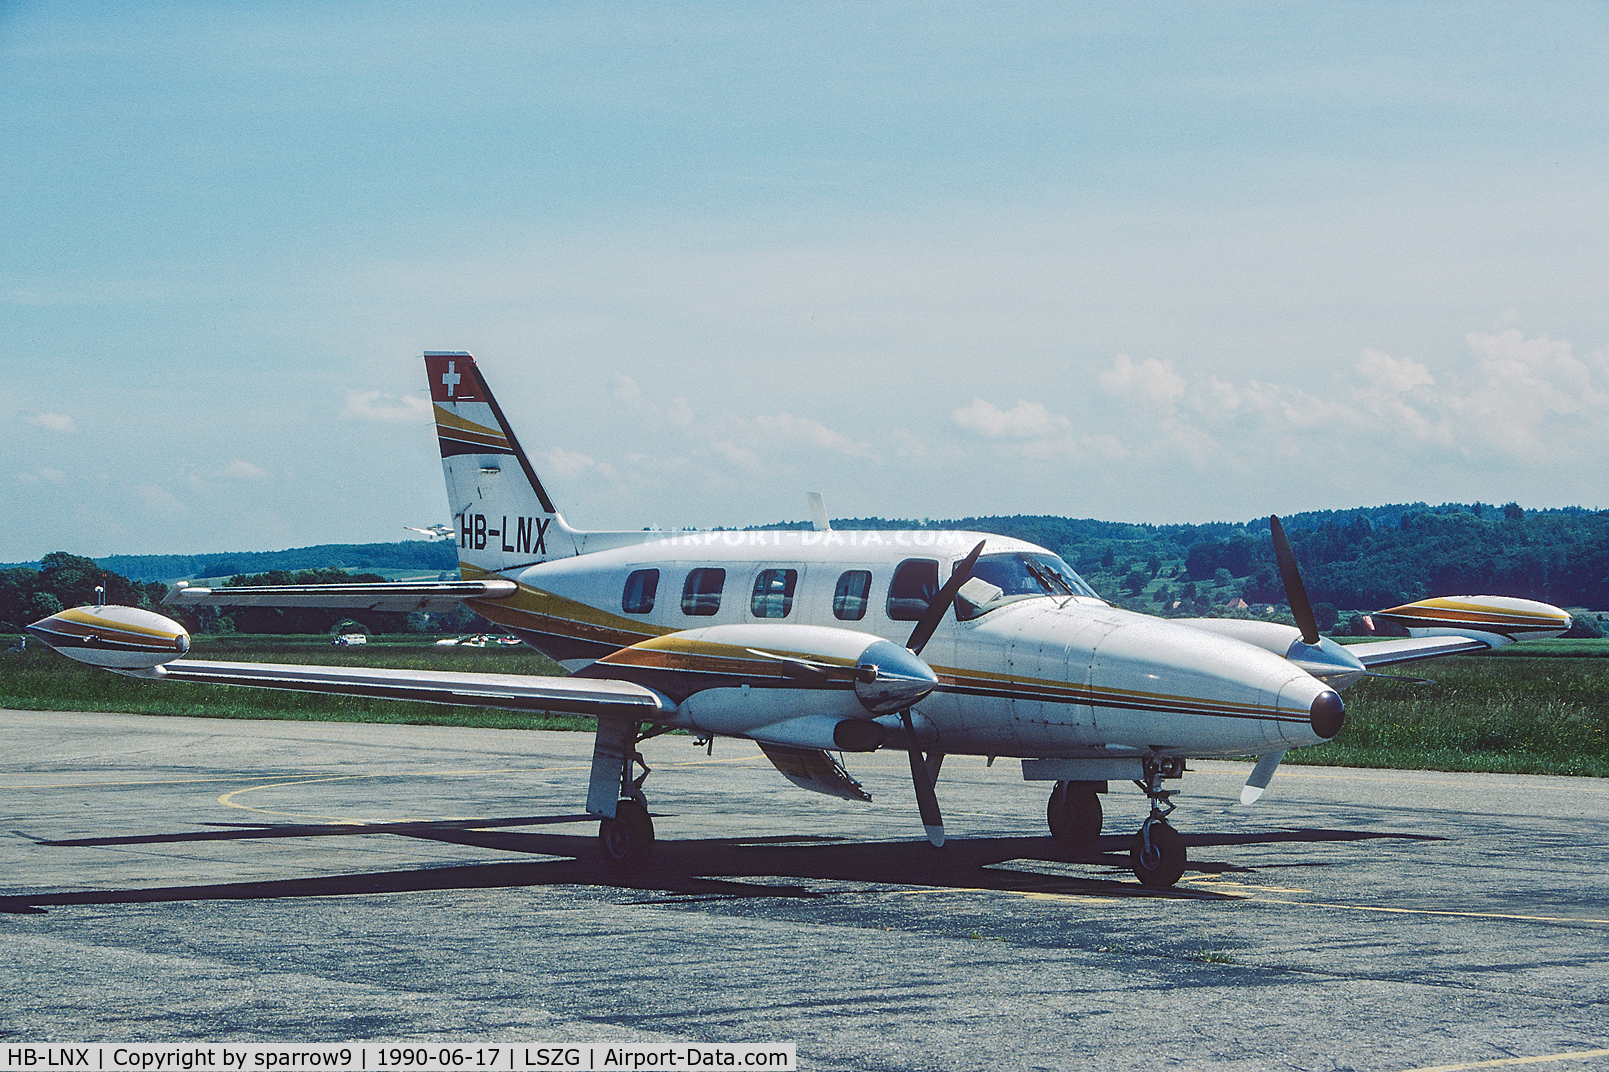 HB-LNX, 1982 Piper PA-31T2 Cheyenne IIXL C/N 31T-8166050, Parked at Grenchen